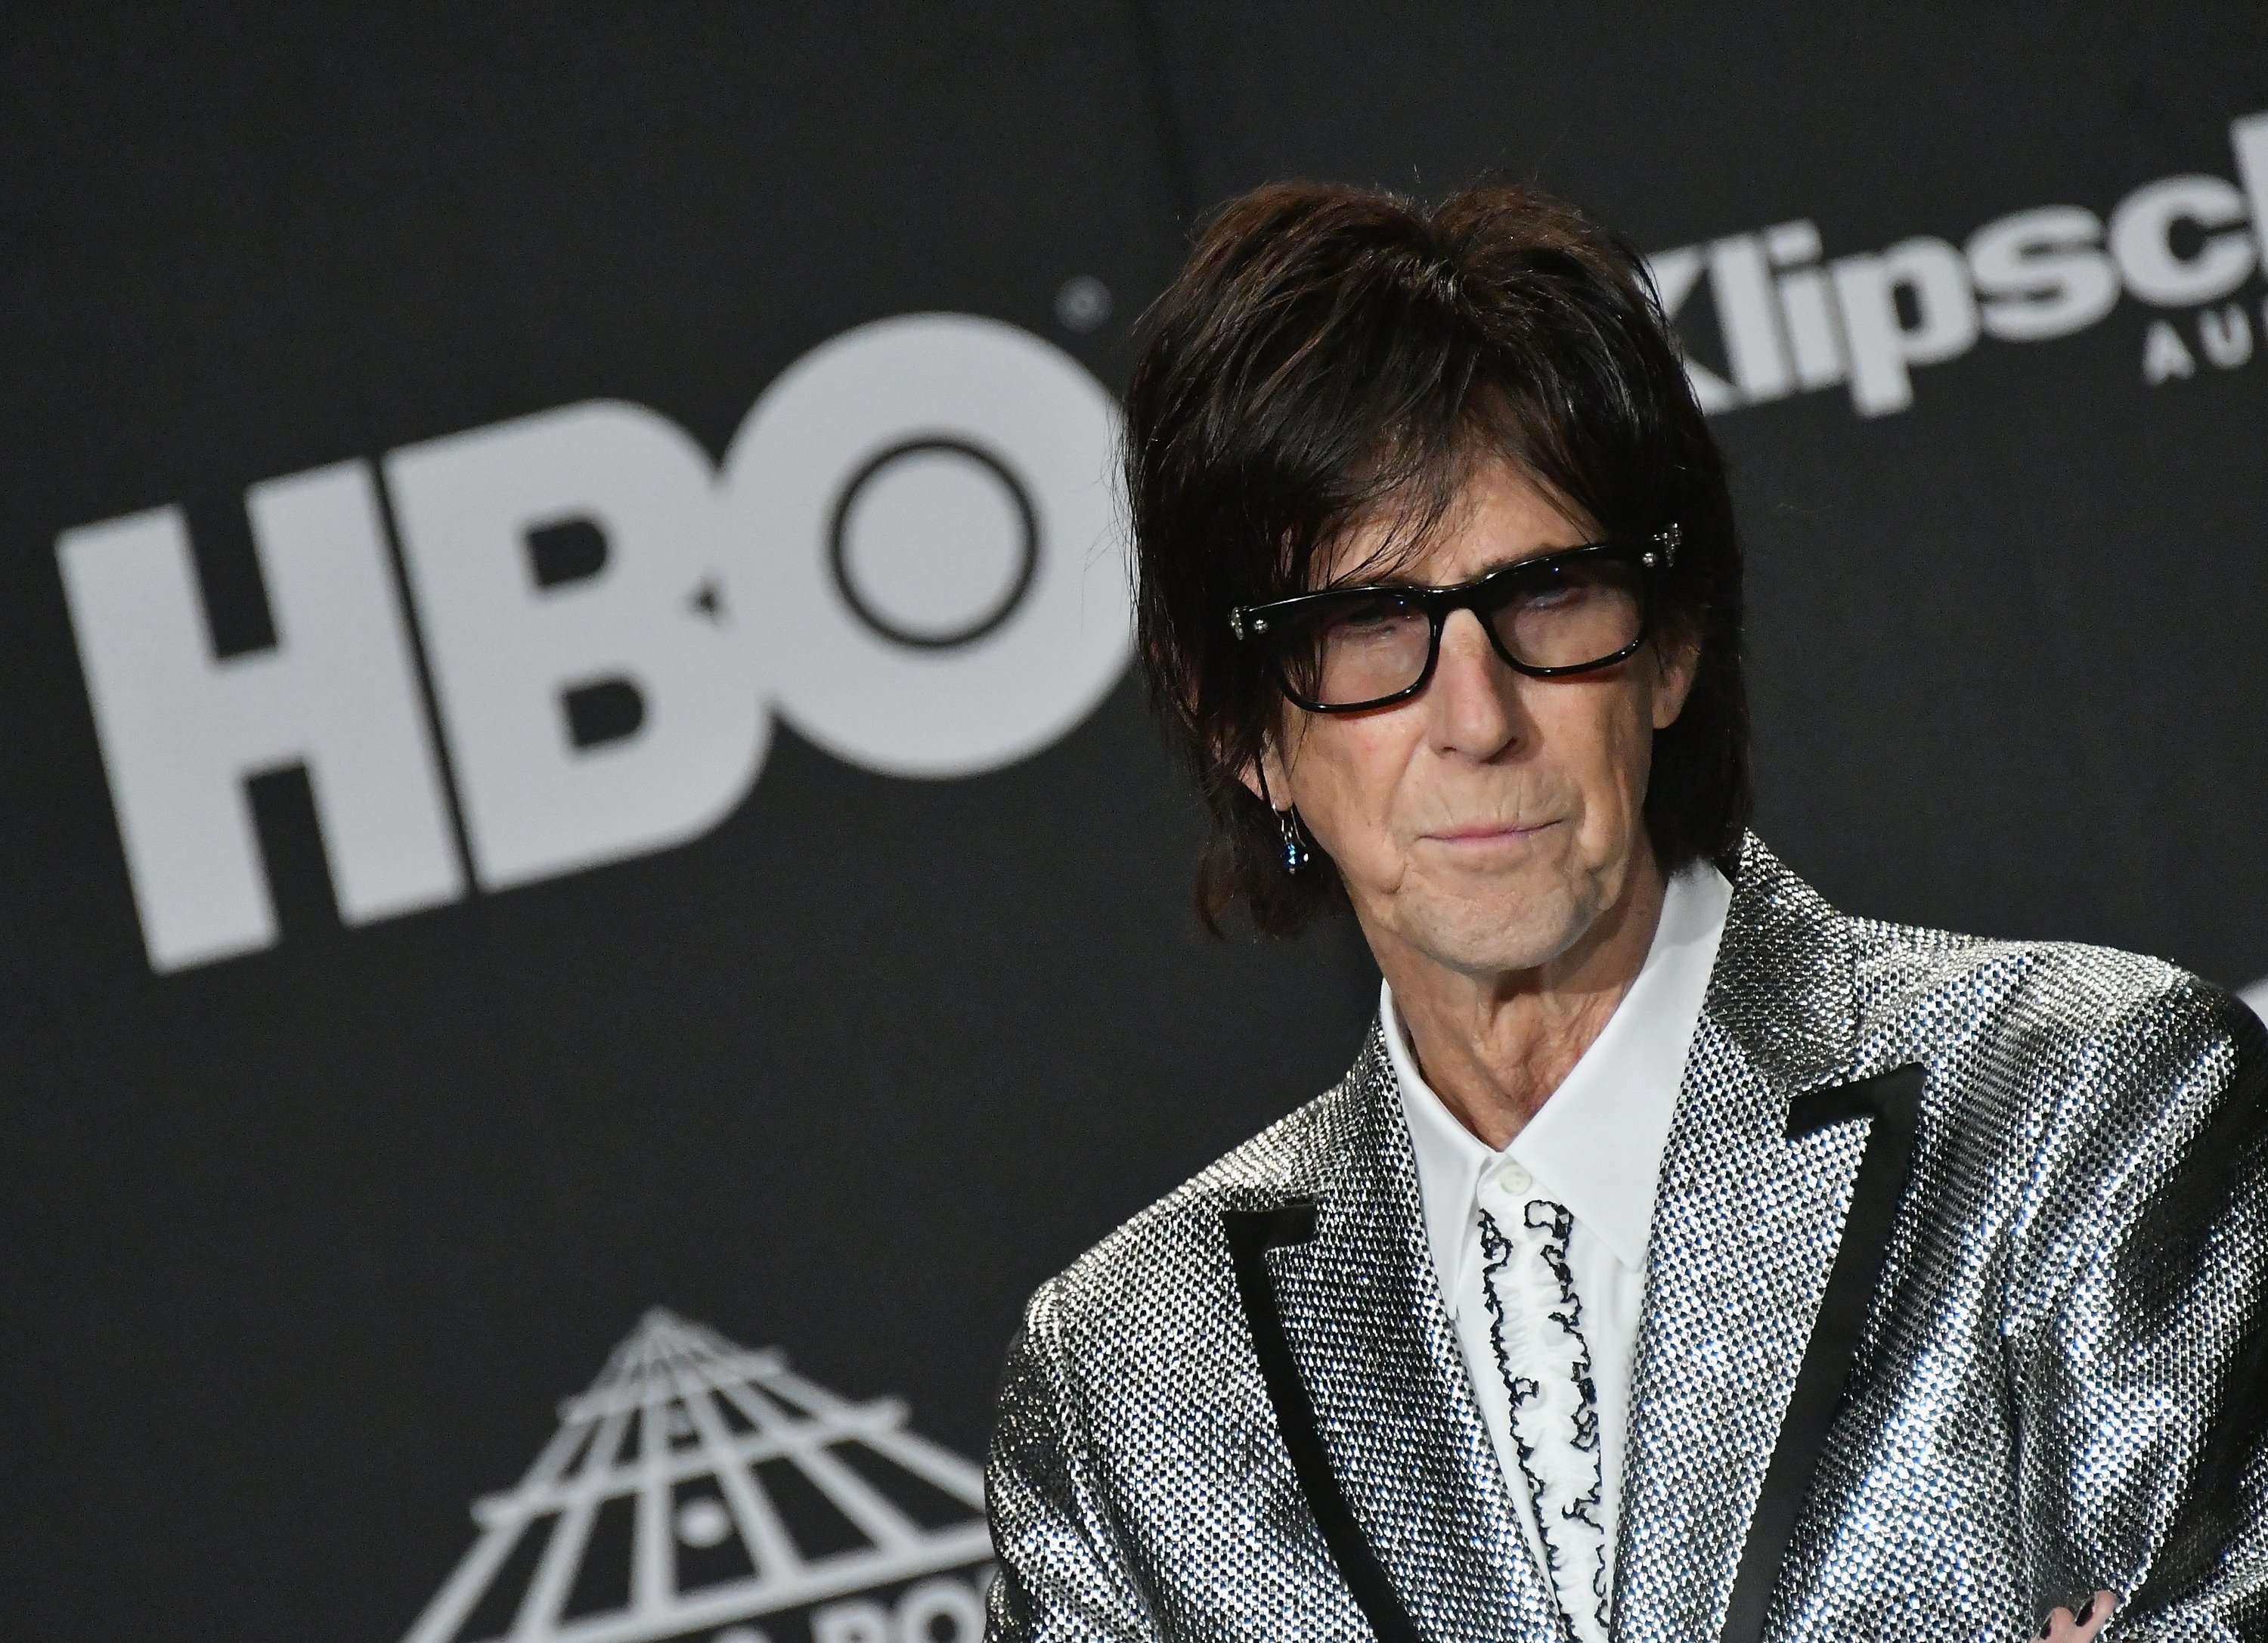 Ric Ocasek attends the Rock & Roll Hall of Fame Induction Ceremony in Cleveland, Ohio on April 14, 2018 | Photo: Getty Images